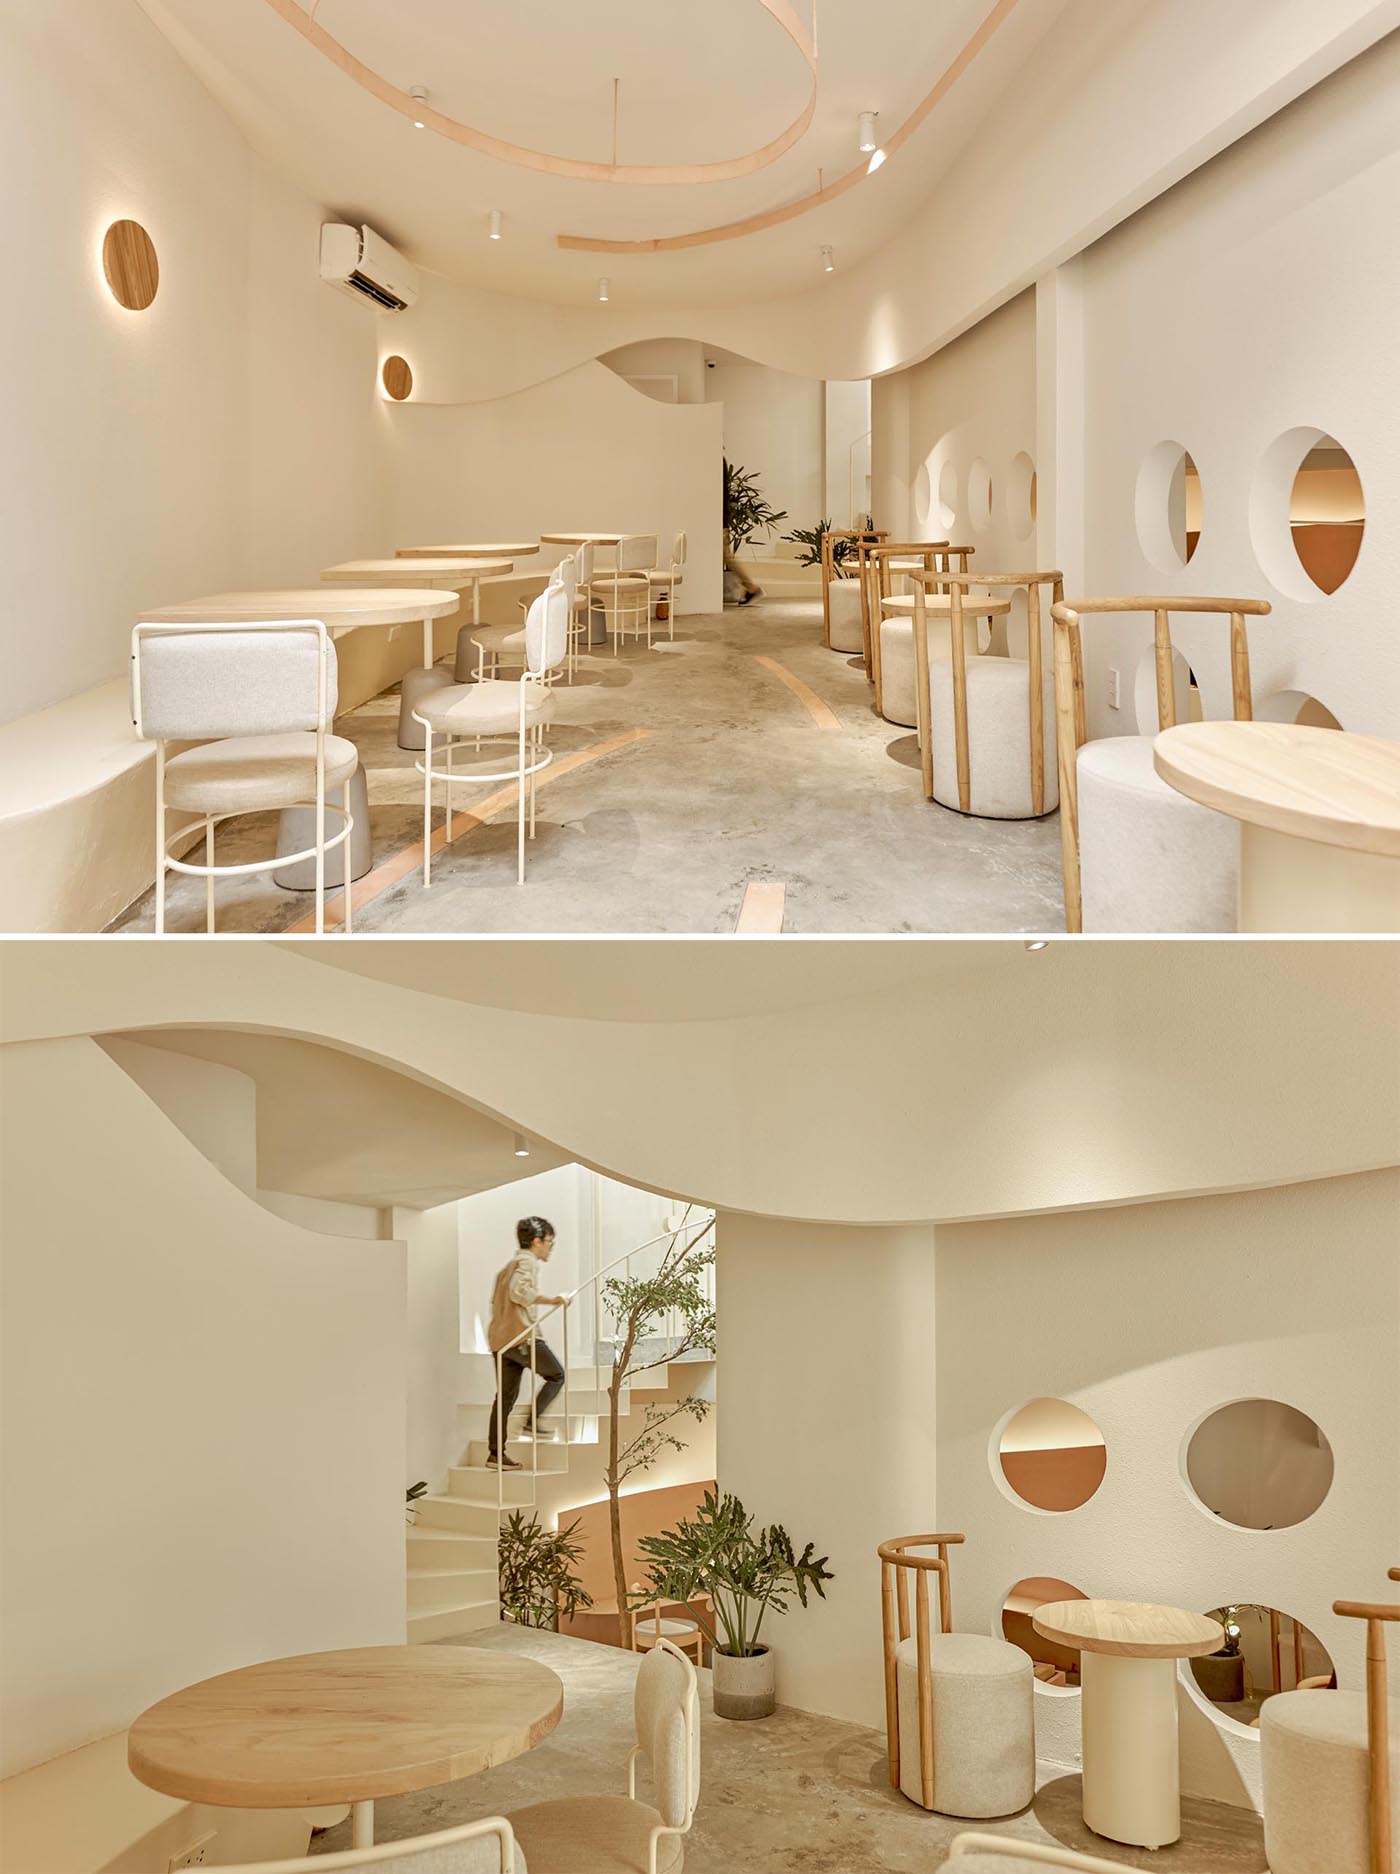 The interior of this modern coffee shop uses gentle neutral tones such as white, beige, rose-orange, and natural wood colors. 